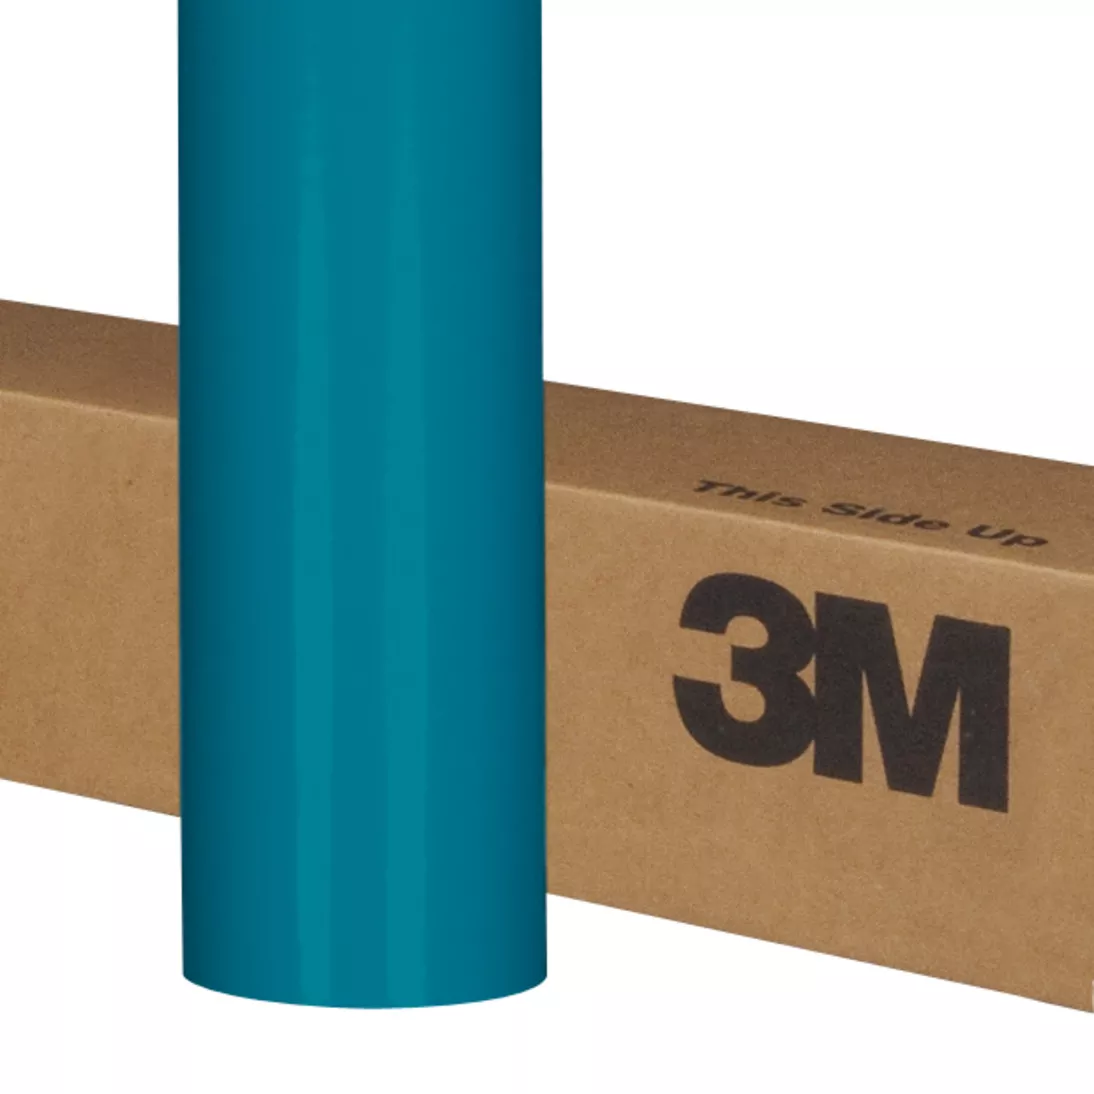 3M™ Scotchcal™ ElectroCut™ Graphic Film 7125-96, Teal, 24 in x 50 yd